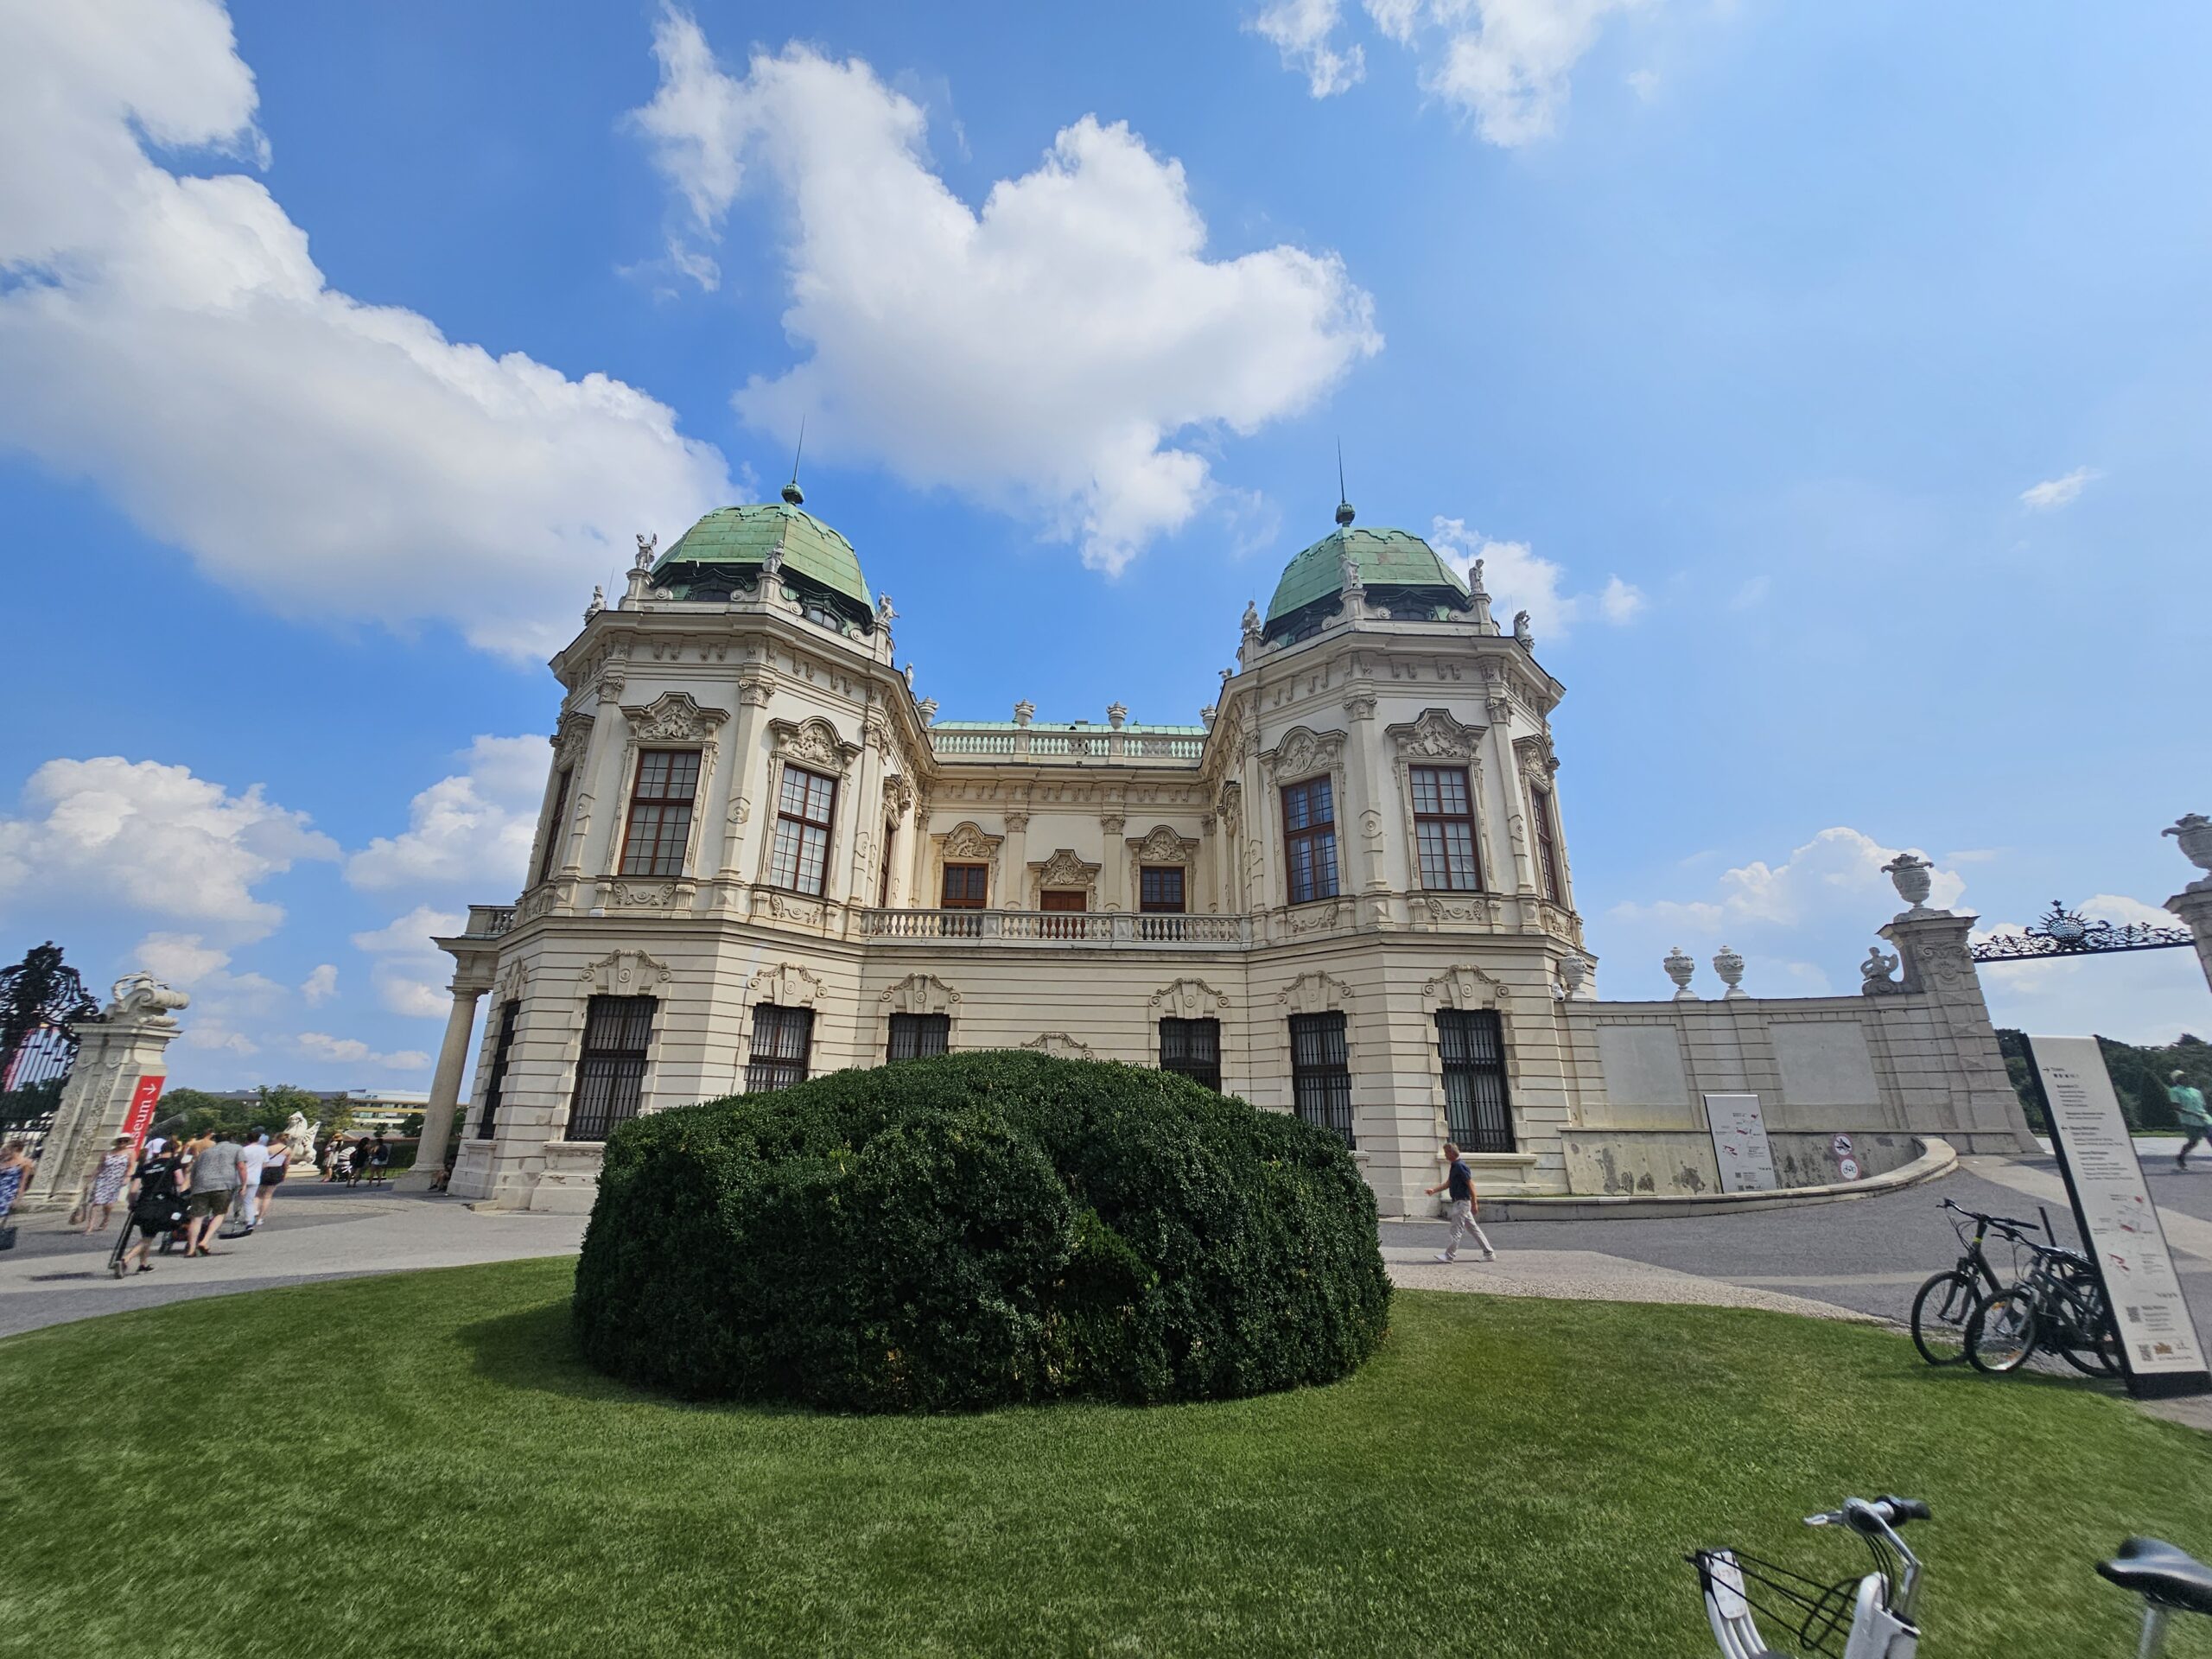 Sideview of Upper Belvedere Palace, with two domes and a lawn in front.